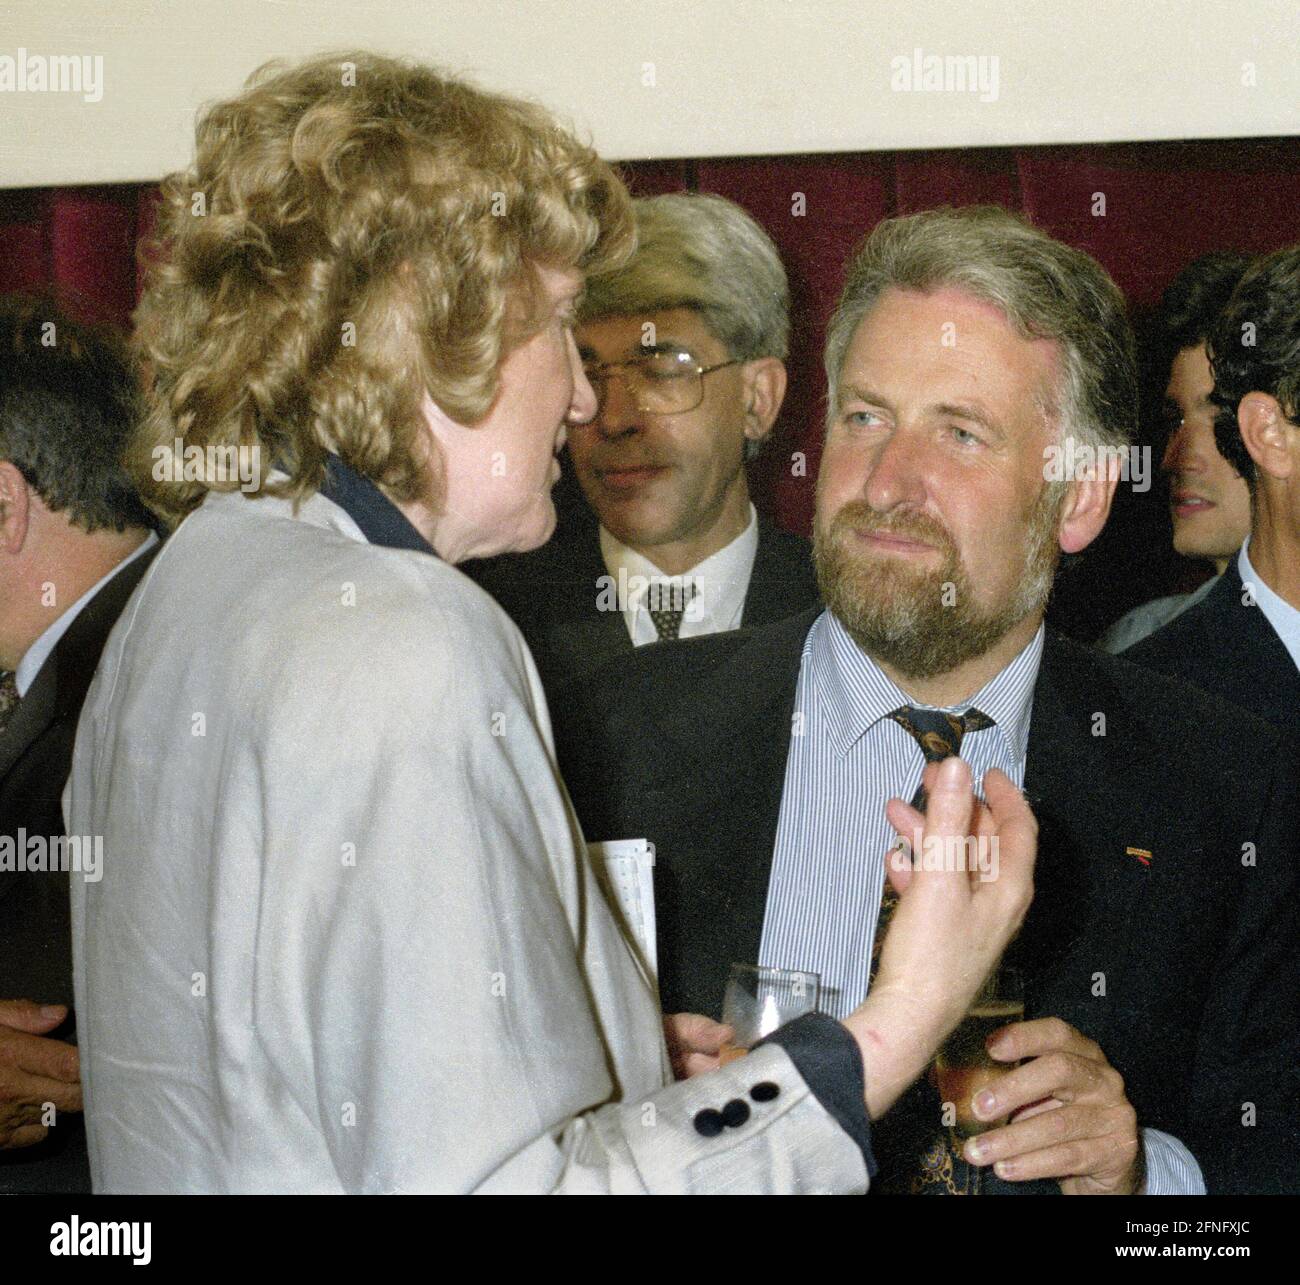 Berlin / Treuhand-Anstalt / ELF / 1992 Sale of the Leuna refinery to ELF-Aquitaine, contract signed in the Treuhand on 23.7.1992. Treuhand boss Birgit Breuel, ELF boss Le Floch Prigent drinking champagne // GDR / Industry / Privatisation / Donations / Bribery / Corruption / [automated translation] Stock Photo